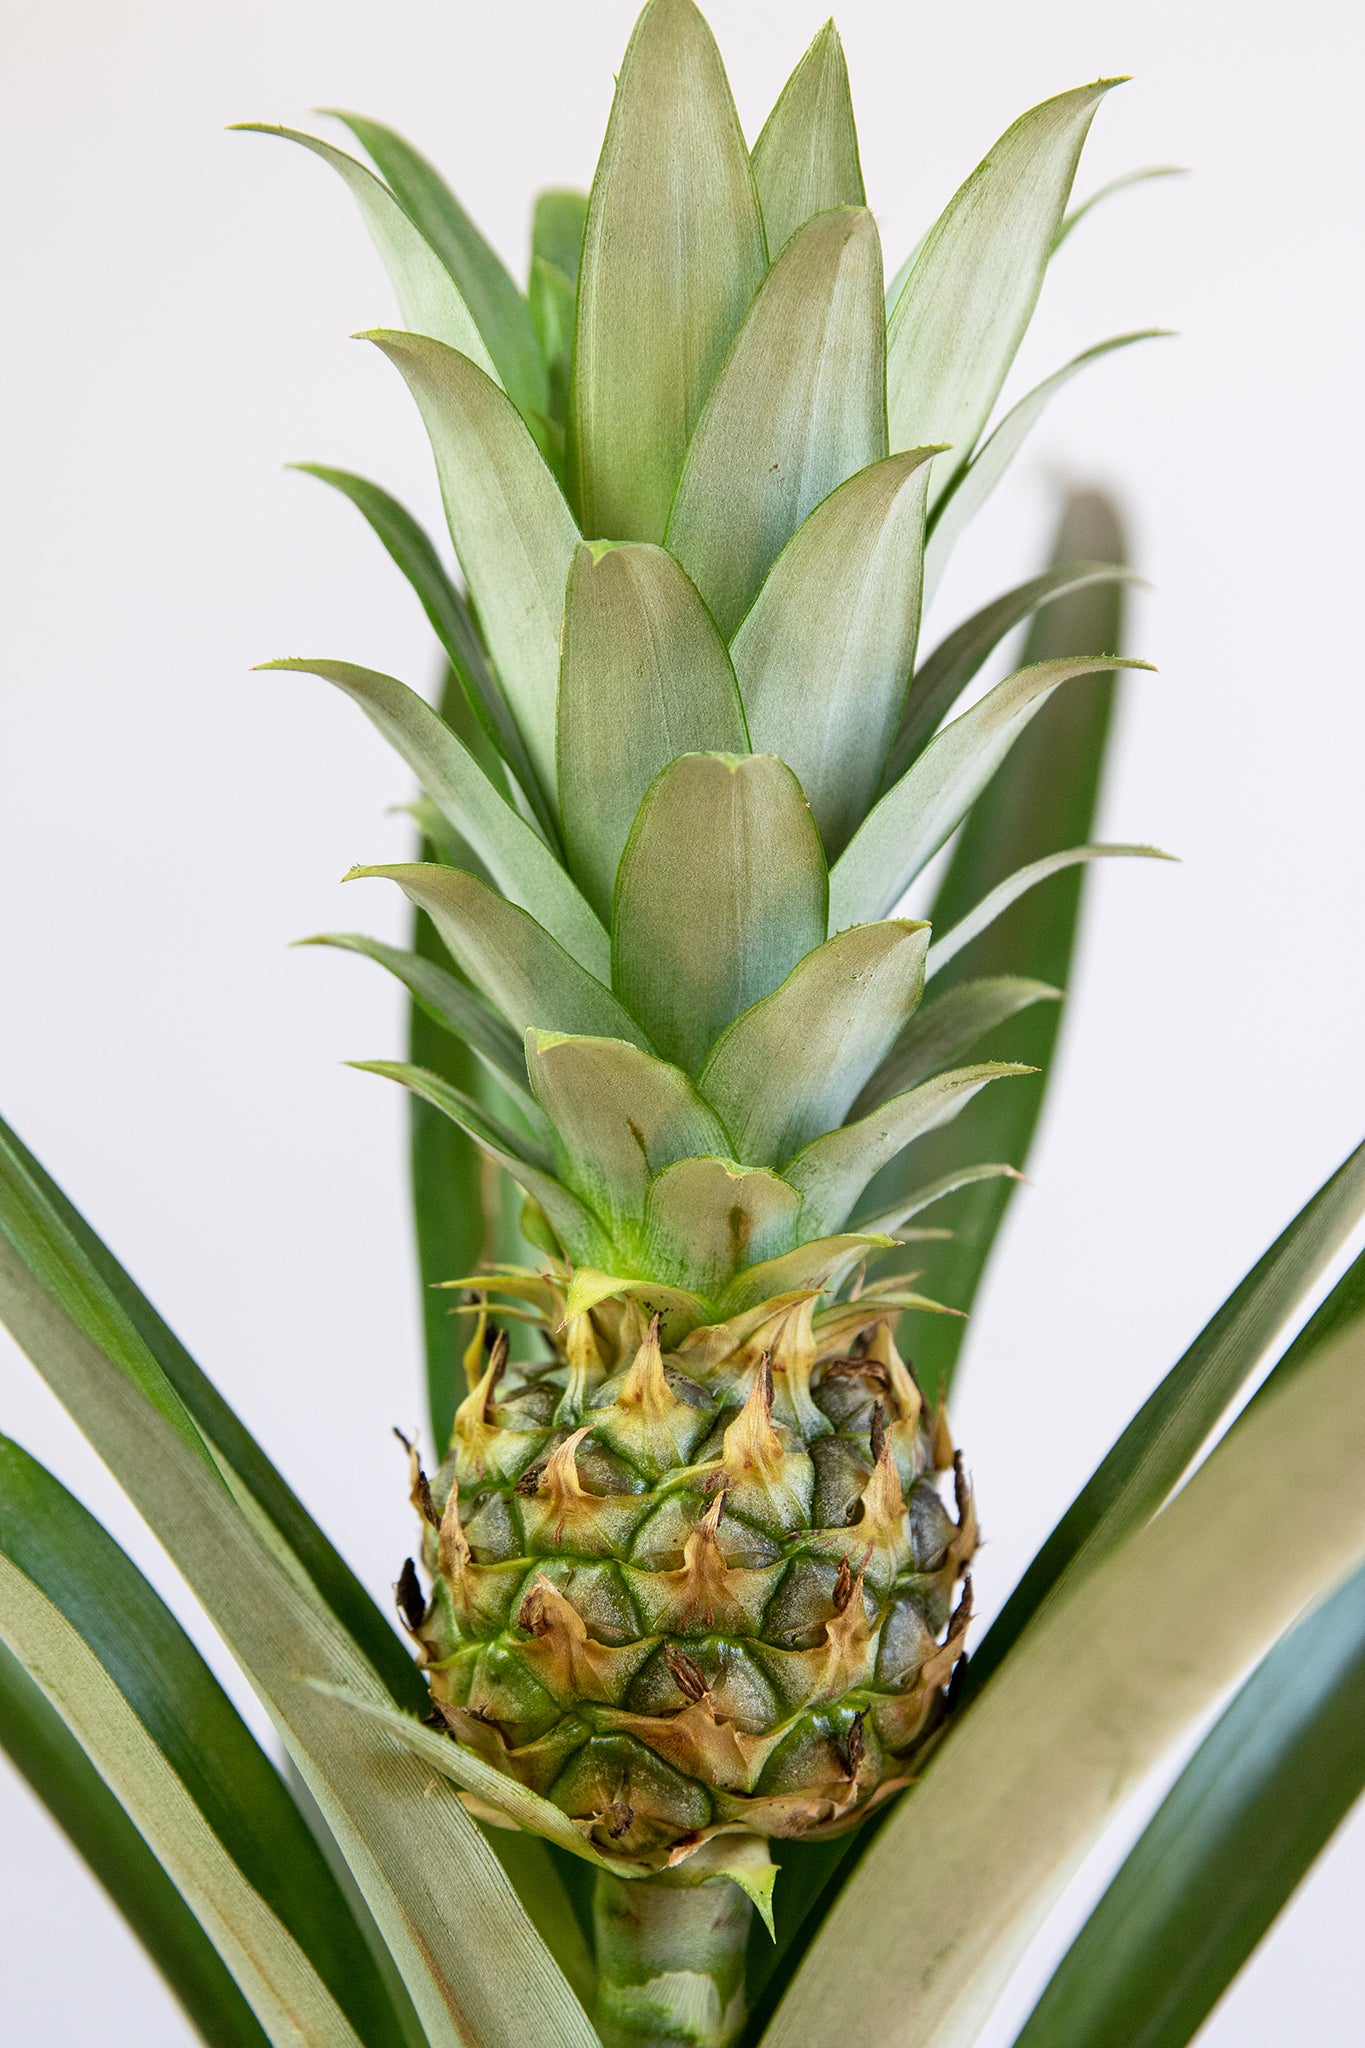 Pineapple 101: Benefits, Nutrition Facts, Side Effects, More